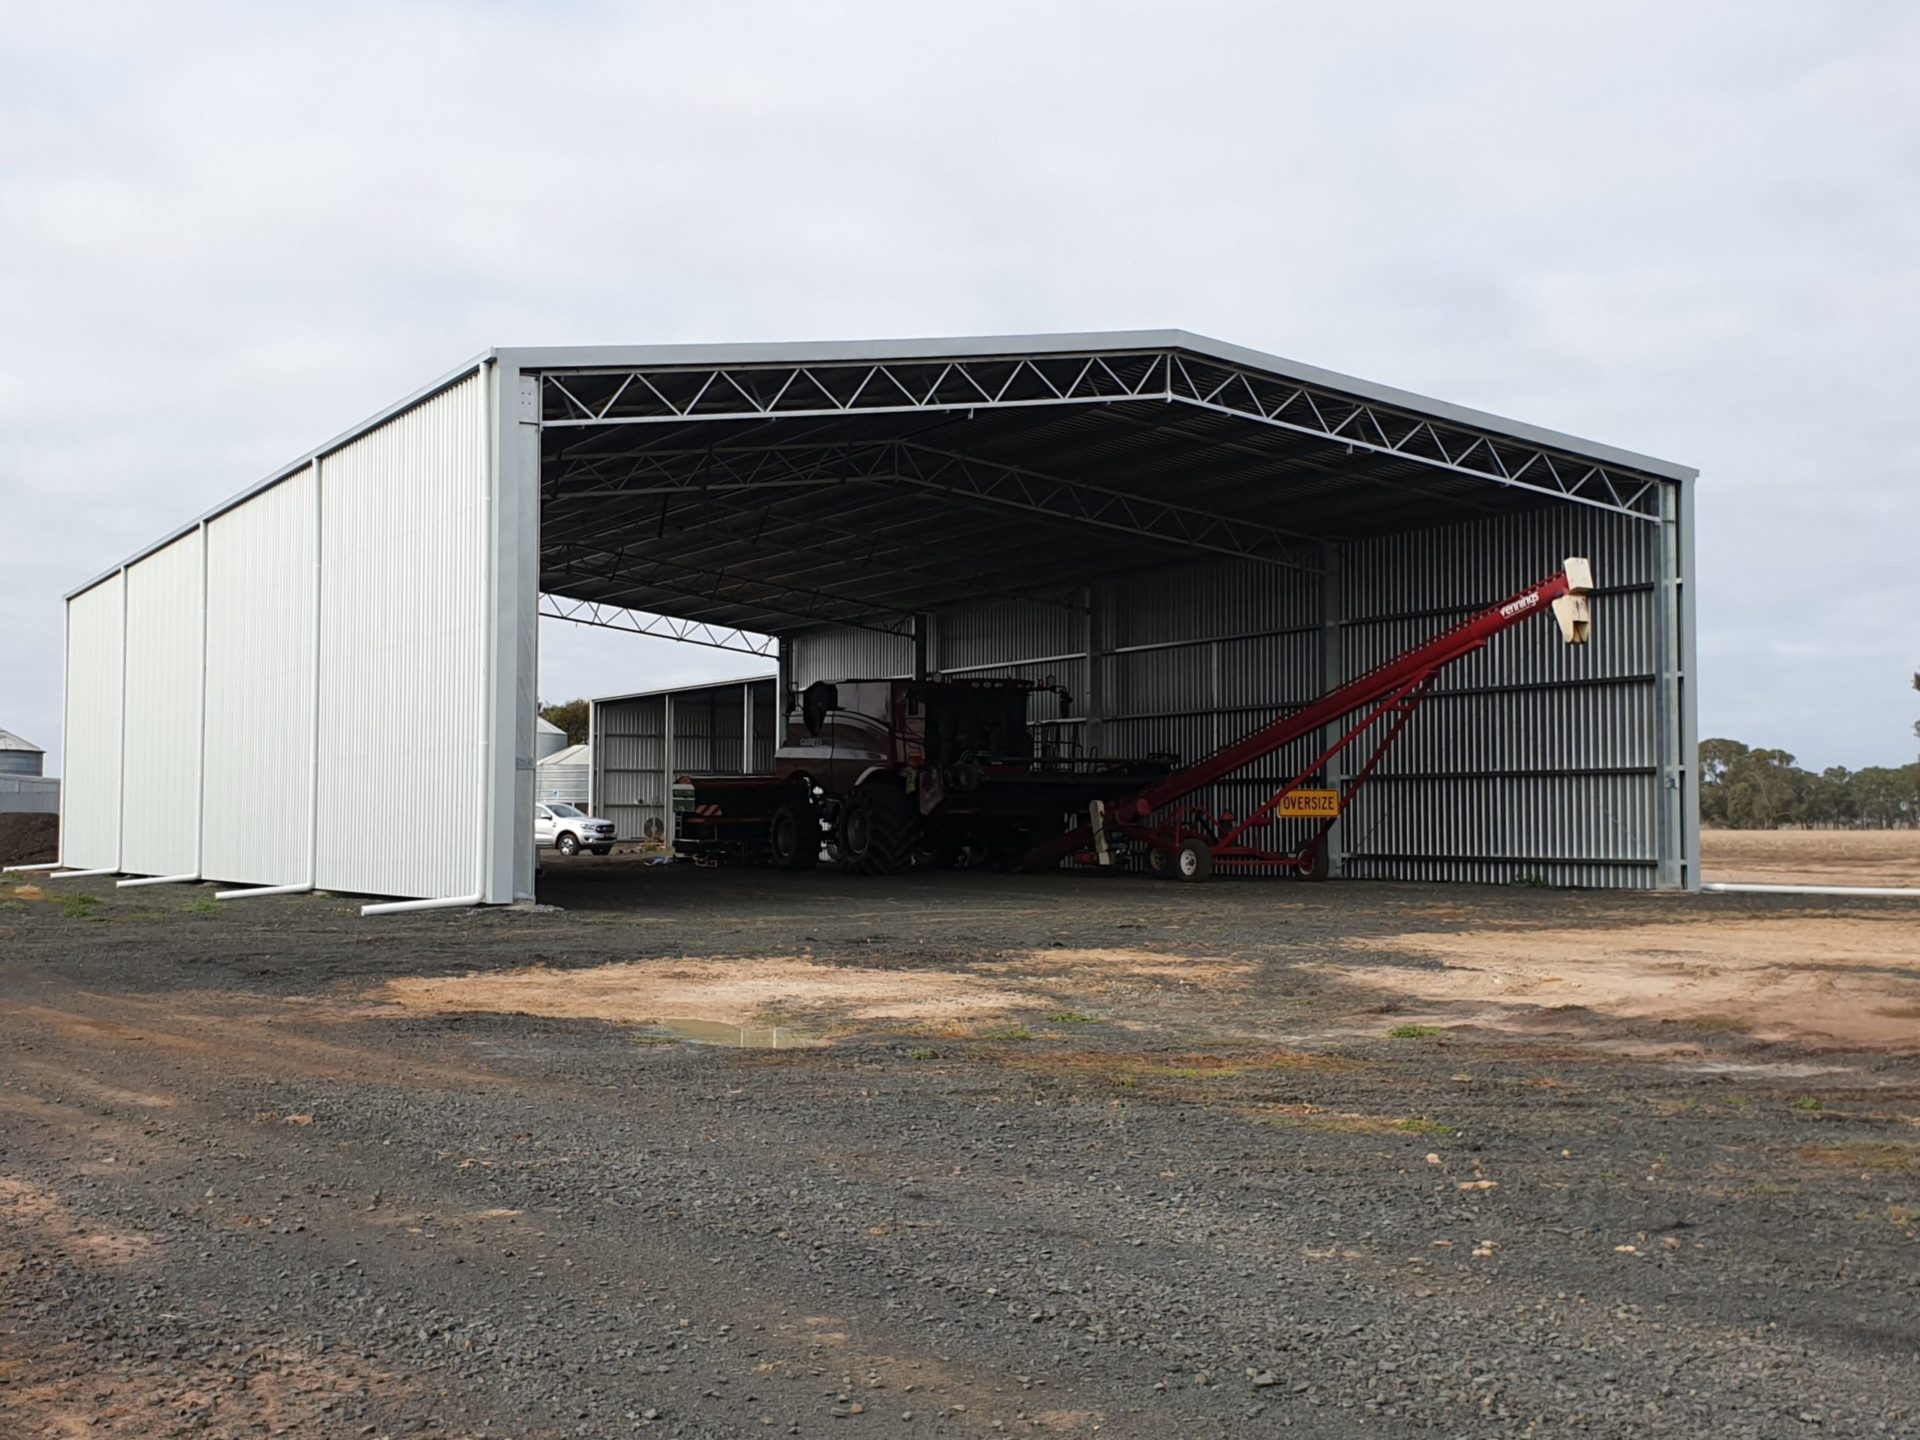 You are currently viewing 32m x 18m x 6m drive-through machinery shed